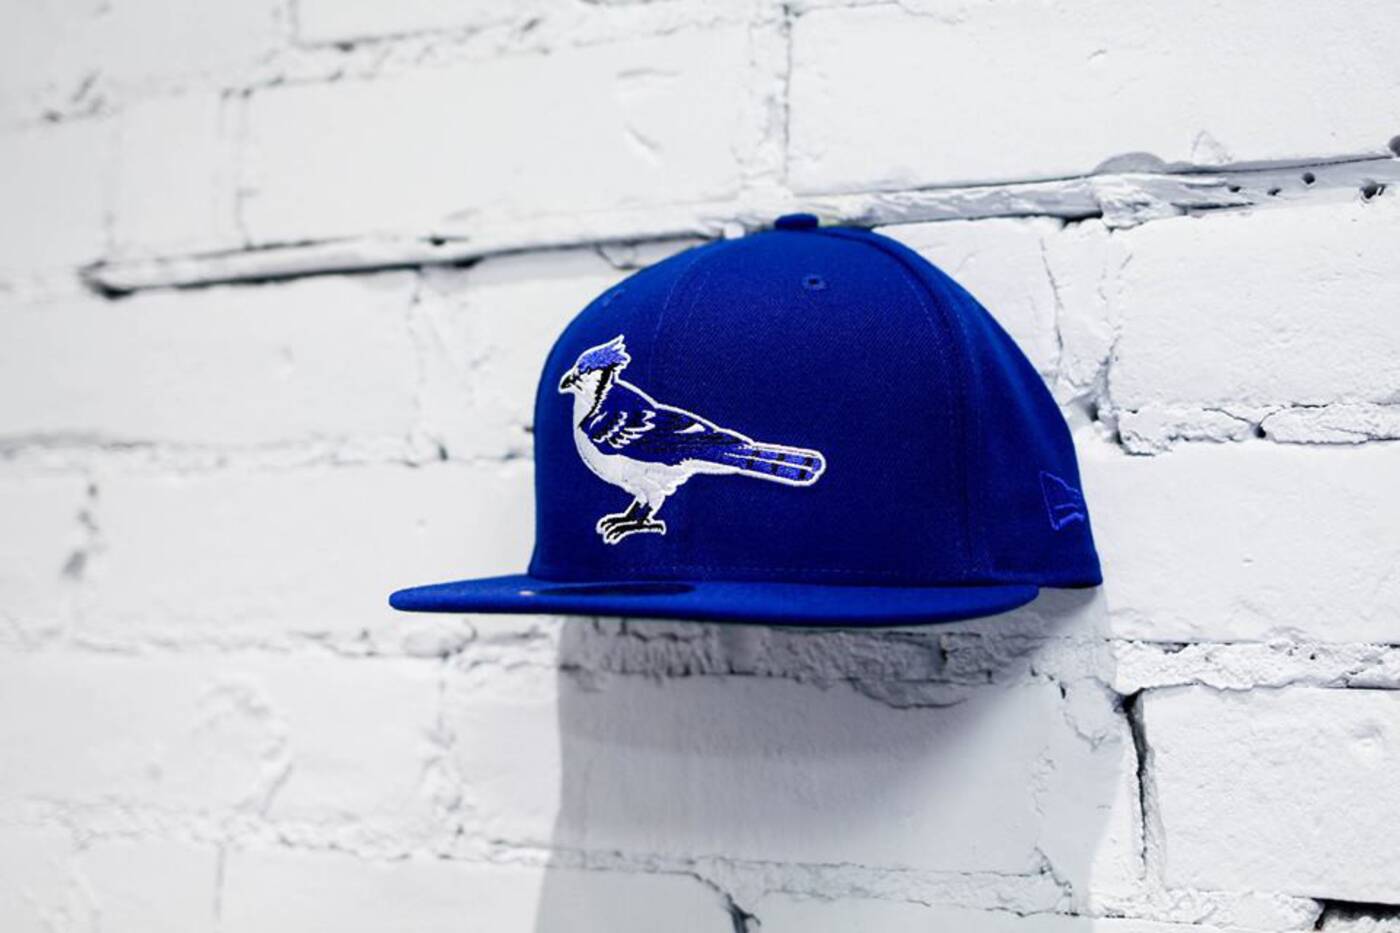 The coolest unofficial Blue Jays gear